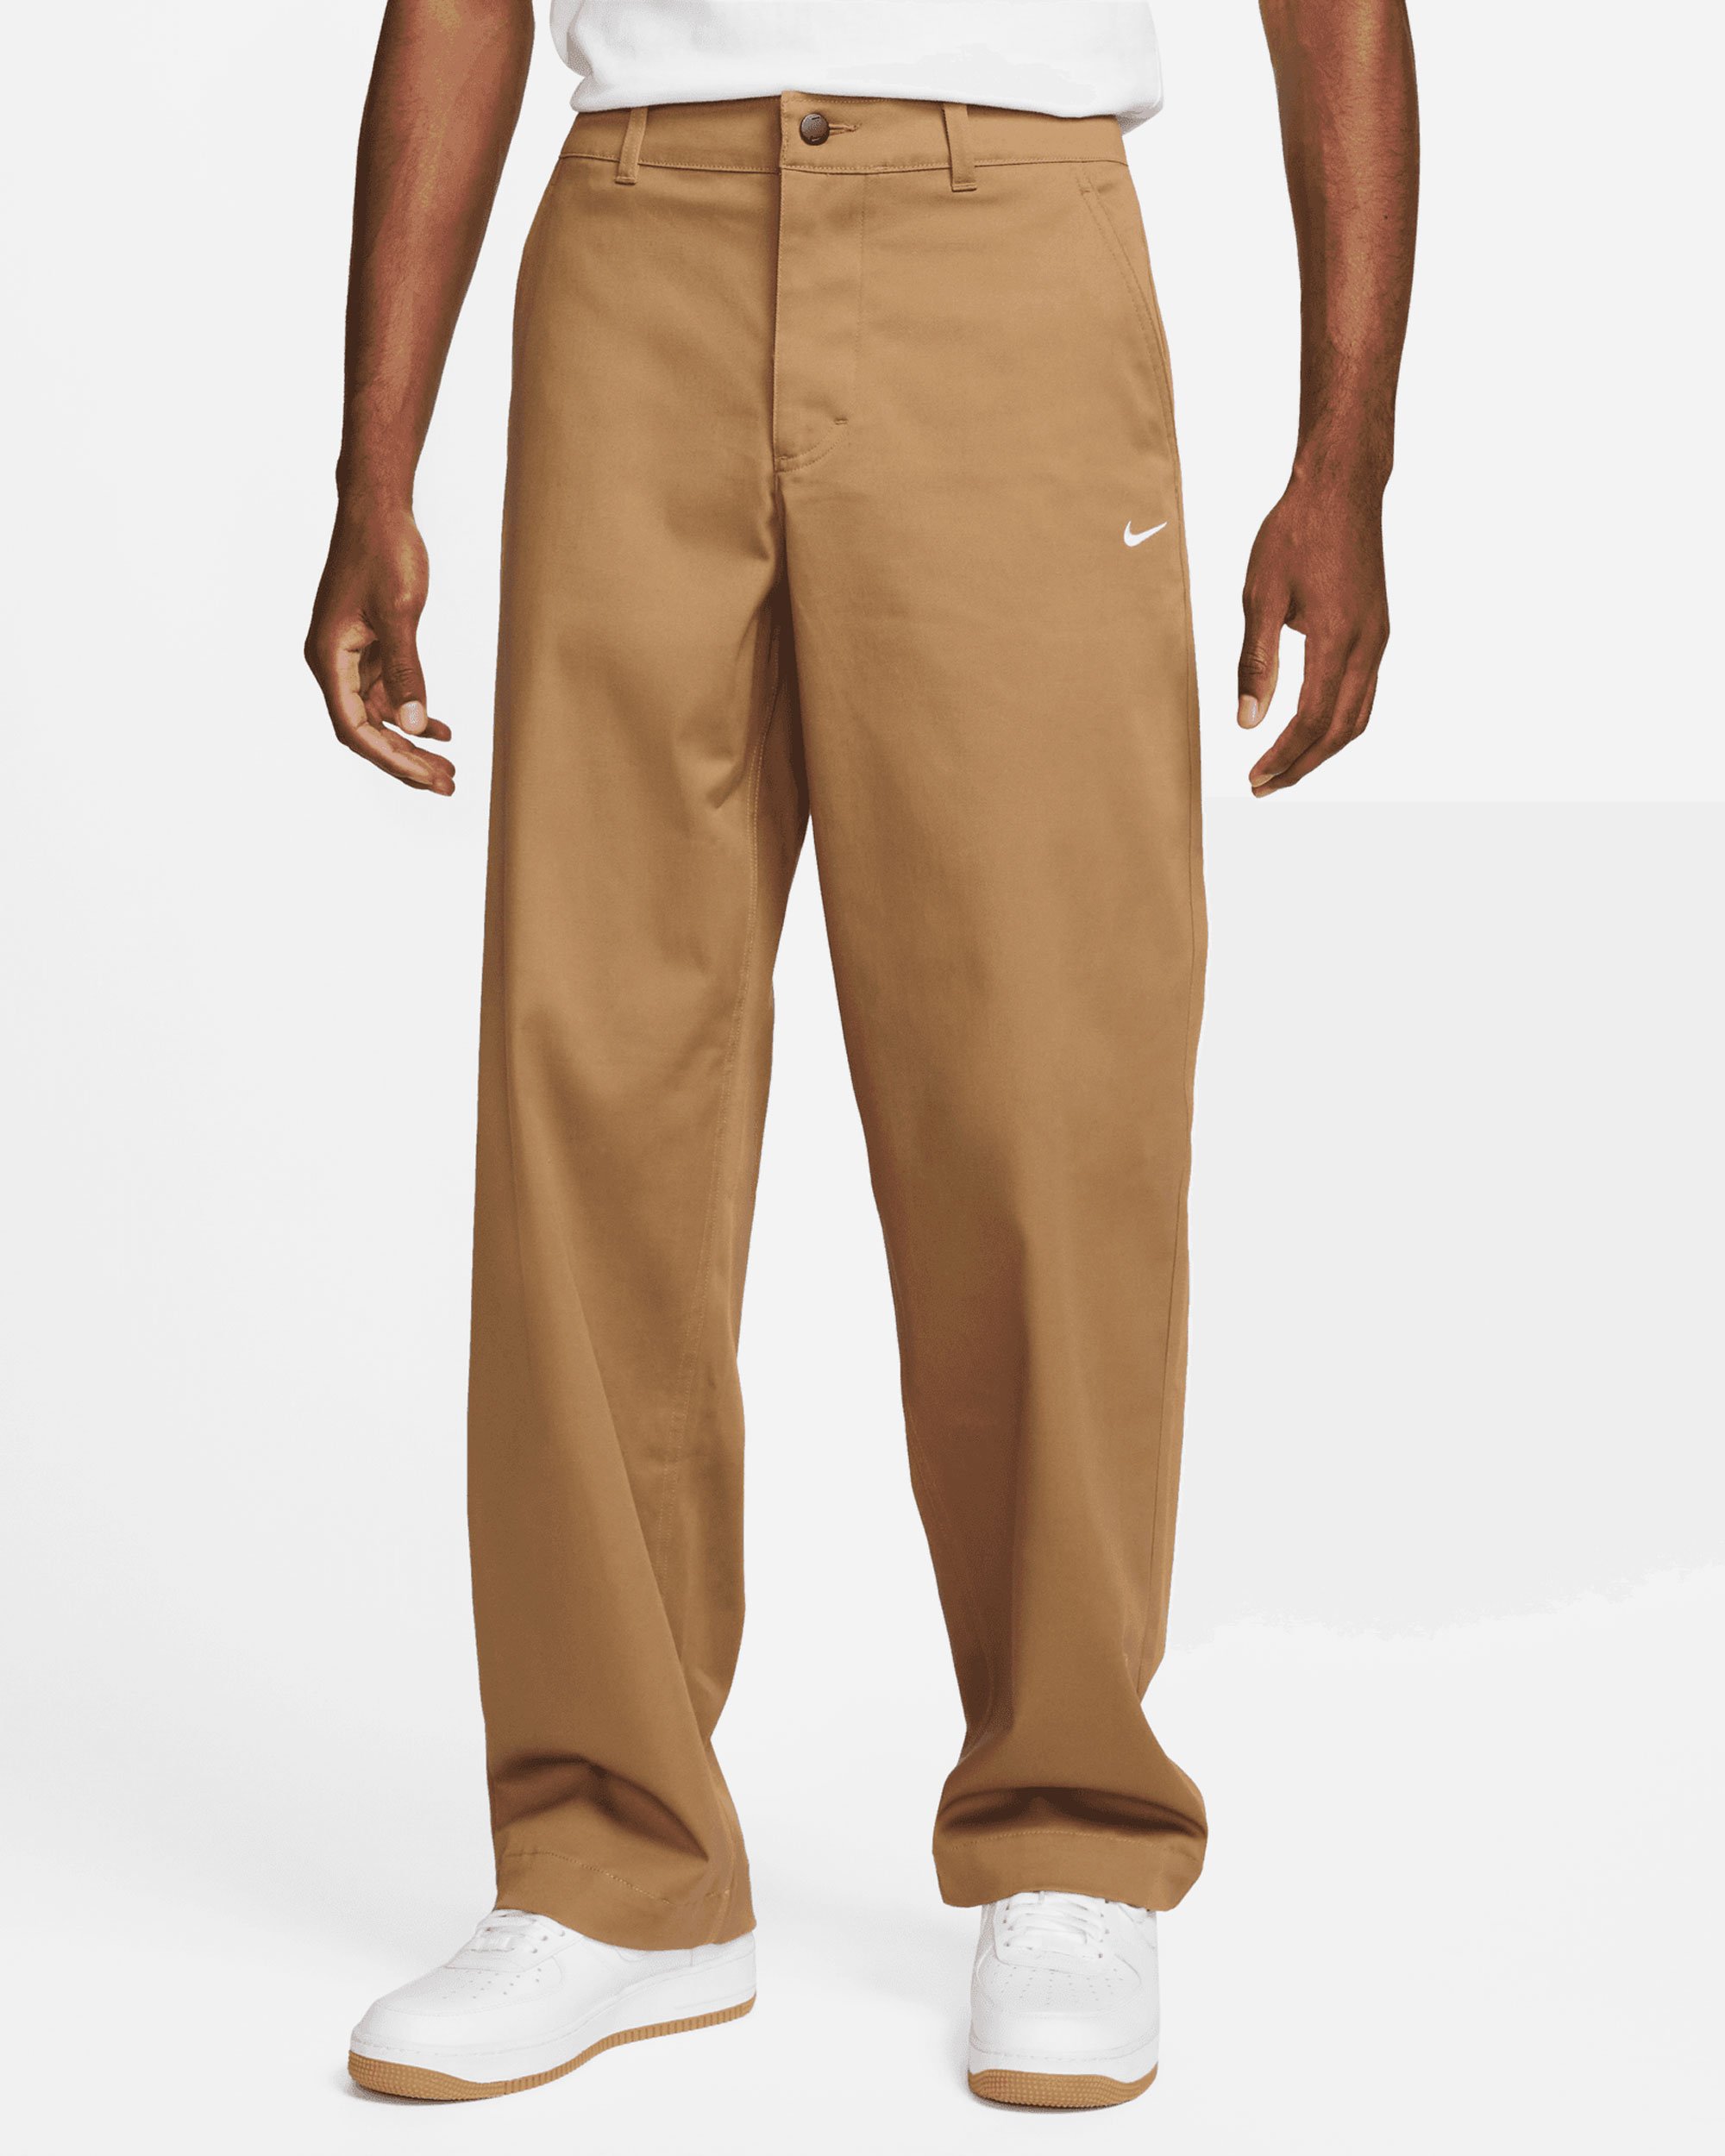 Nike Life Men's Unlined Cotton Chino Pants Brown DX6027-258| Buy 